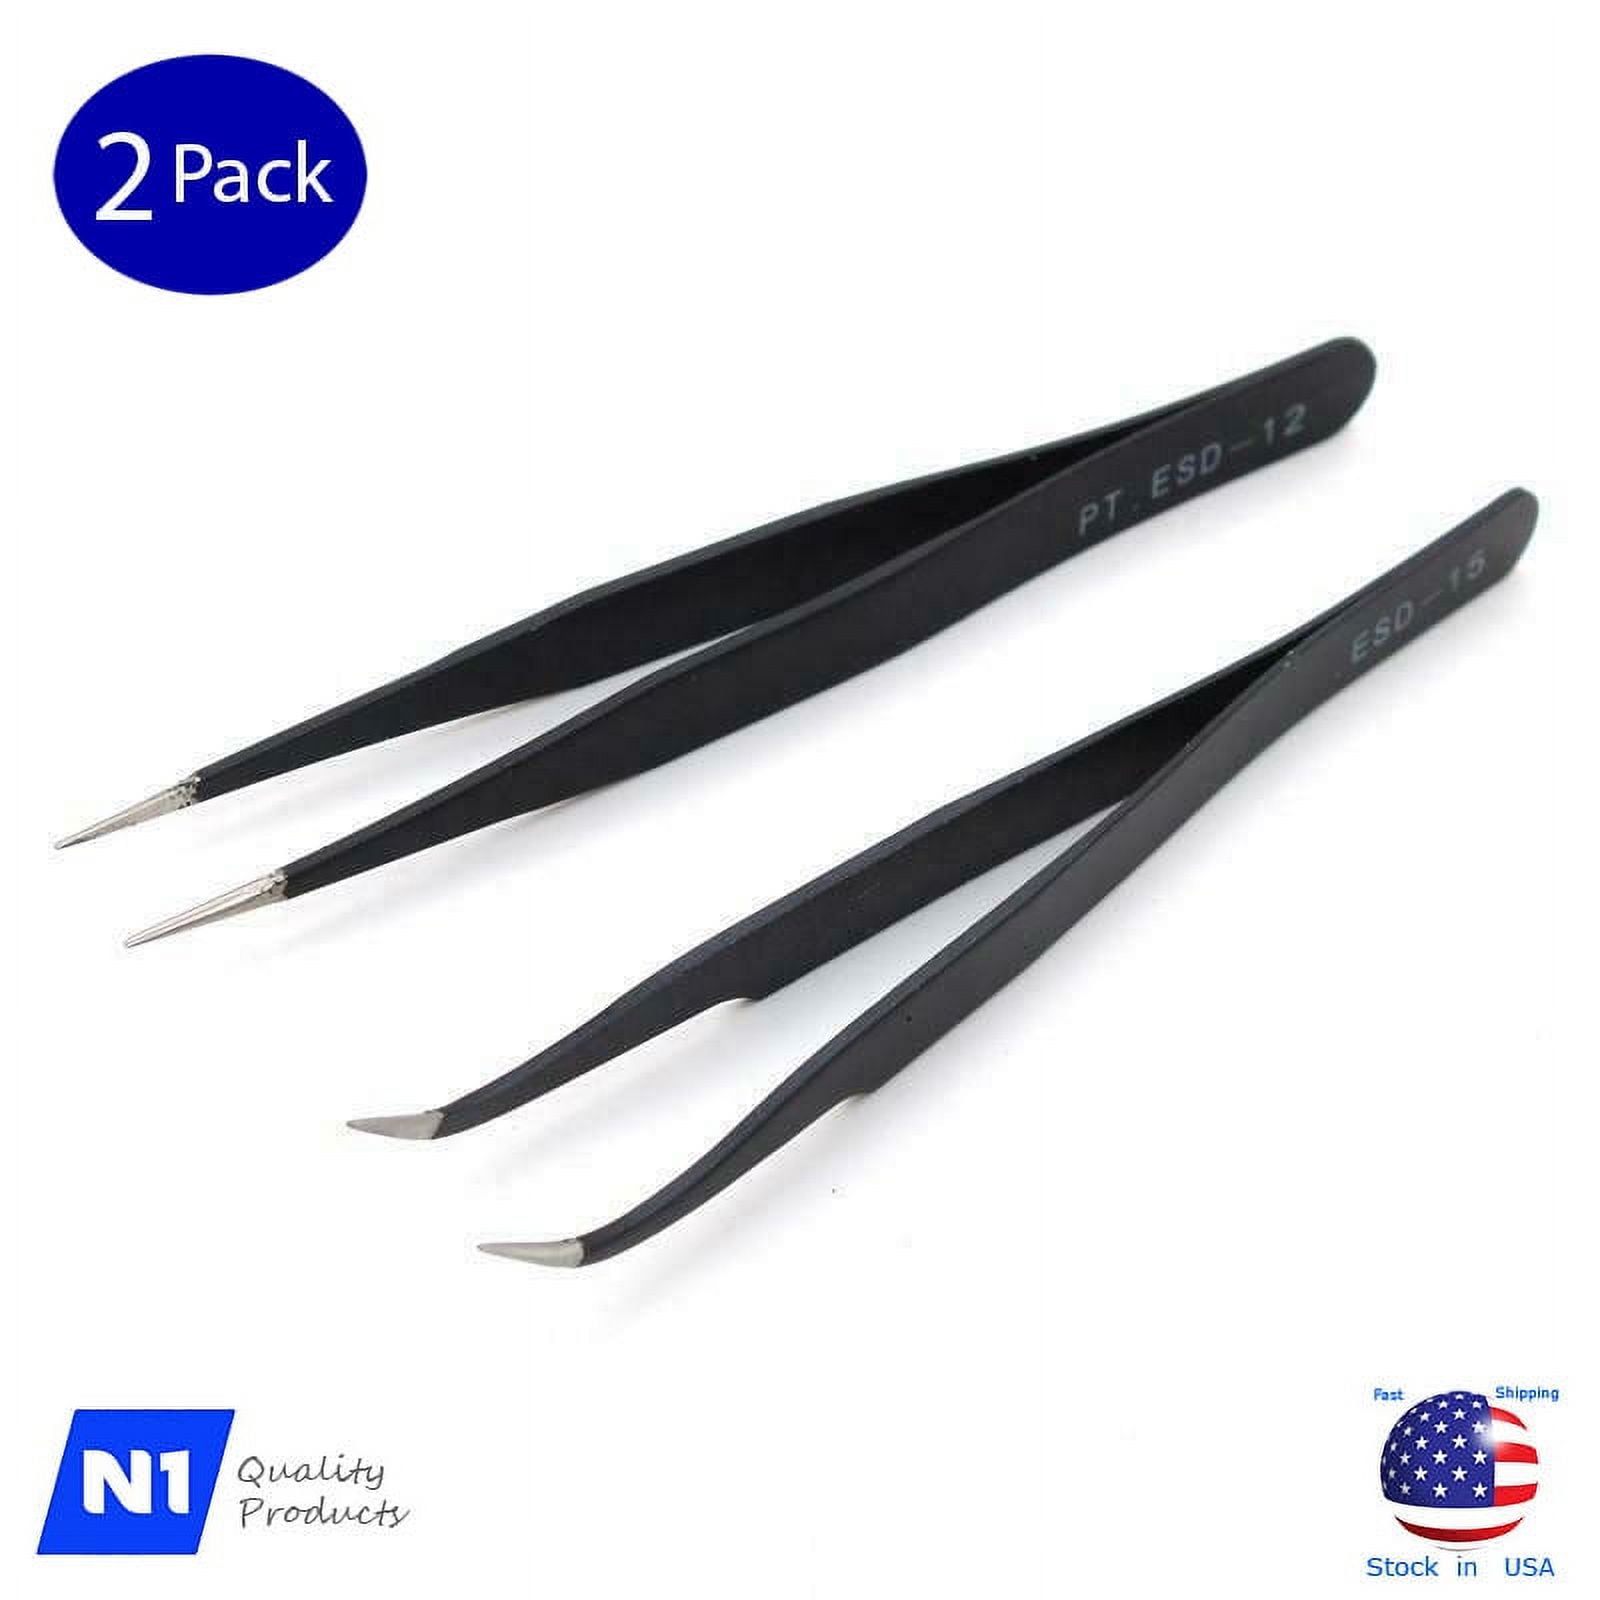 2 Pack Stainless Steel Straight Tweezers And Curved Nippers